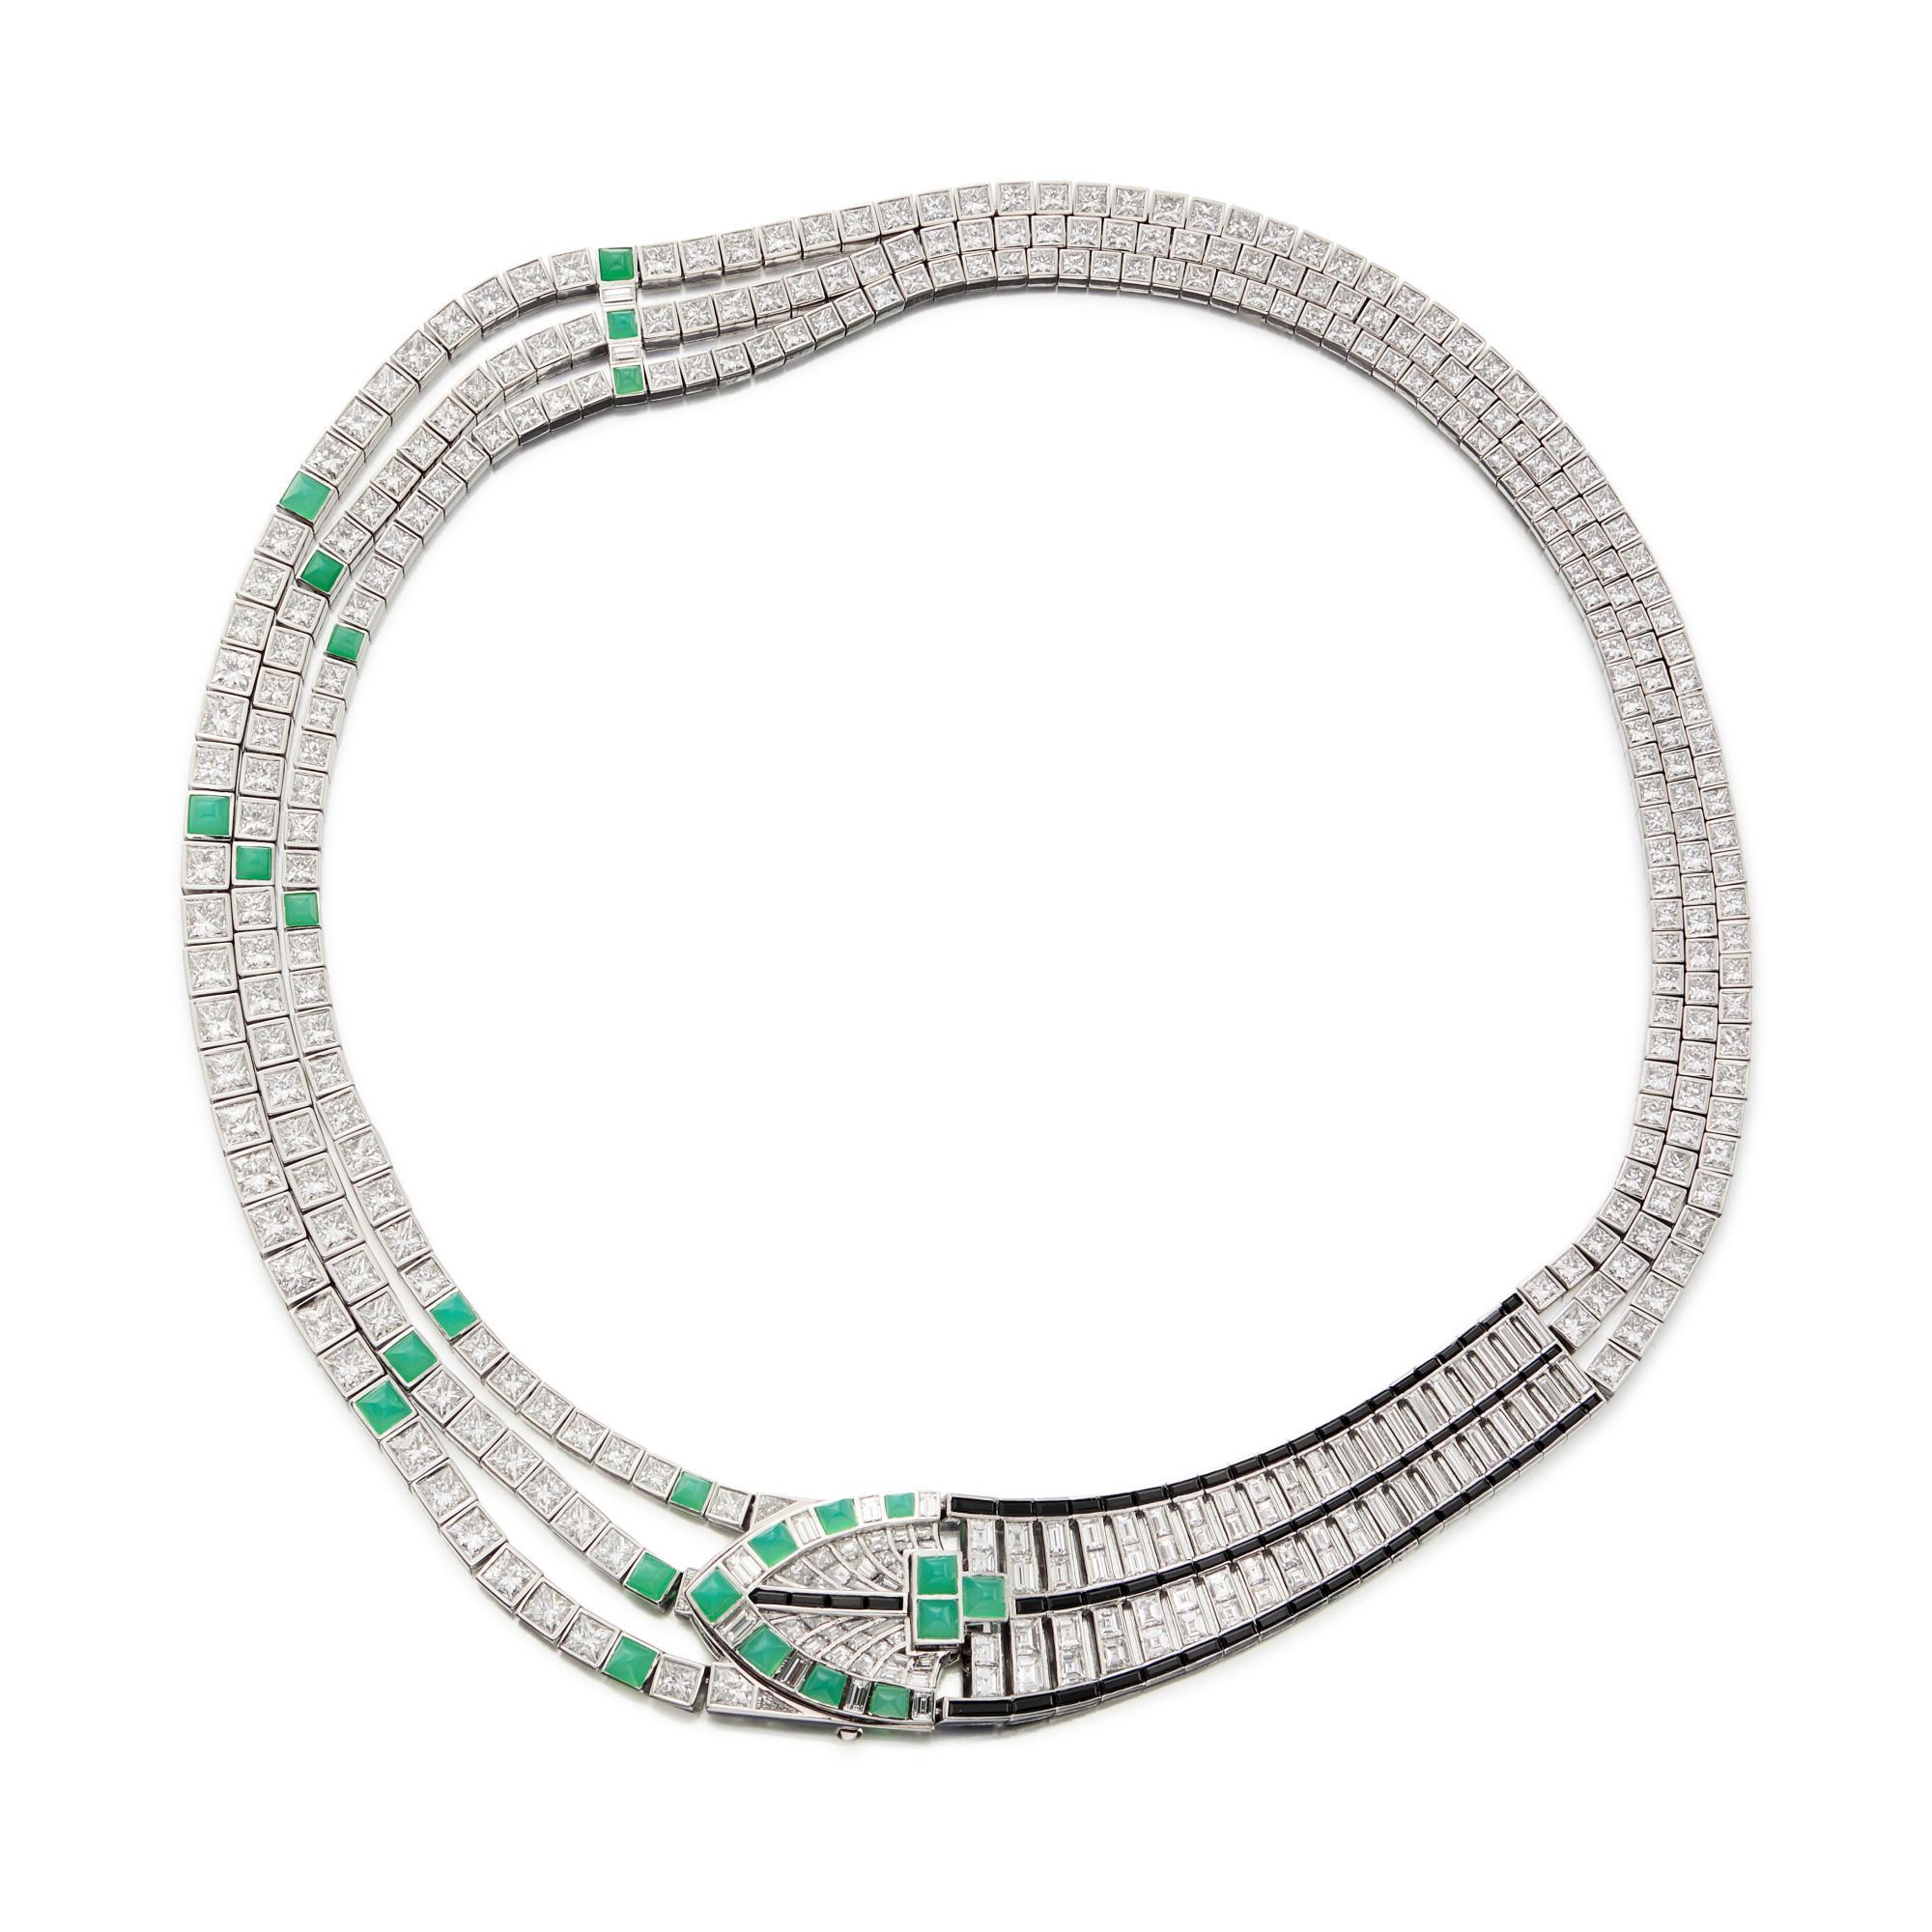 Tiffany & Co. Diamond,Chrysoprase, and Spinel Necklace This necklace has a
flexible design set to the front with a leaf motif, set throughout with square-cut and baguette diamonds (weighing approx. 47.35 carats, Color: F/G, Clarity: VS), accented at